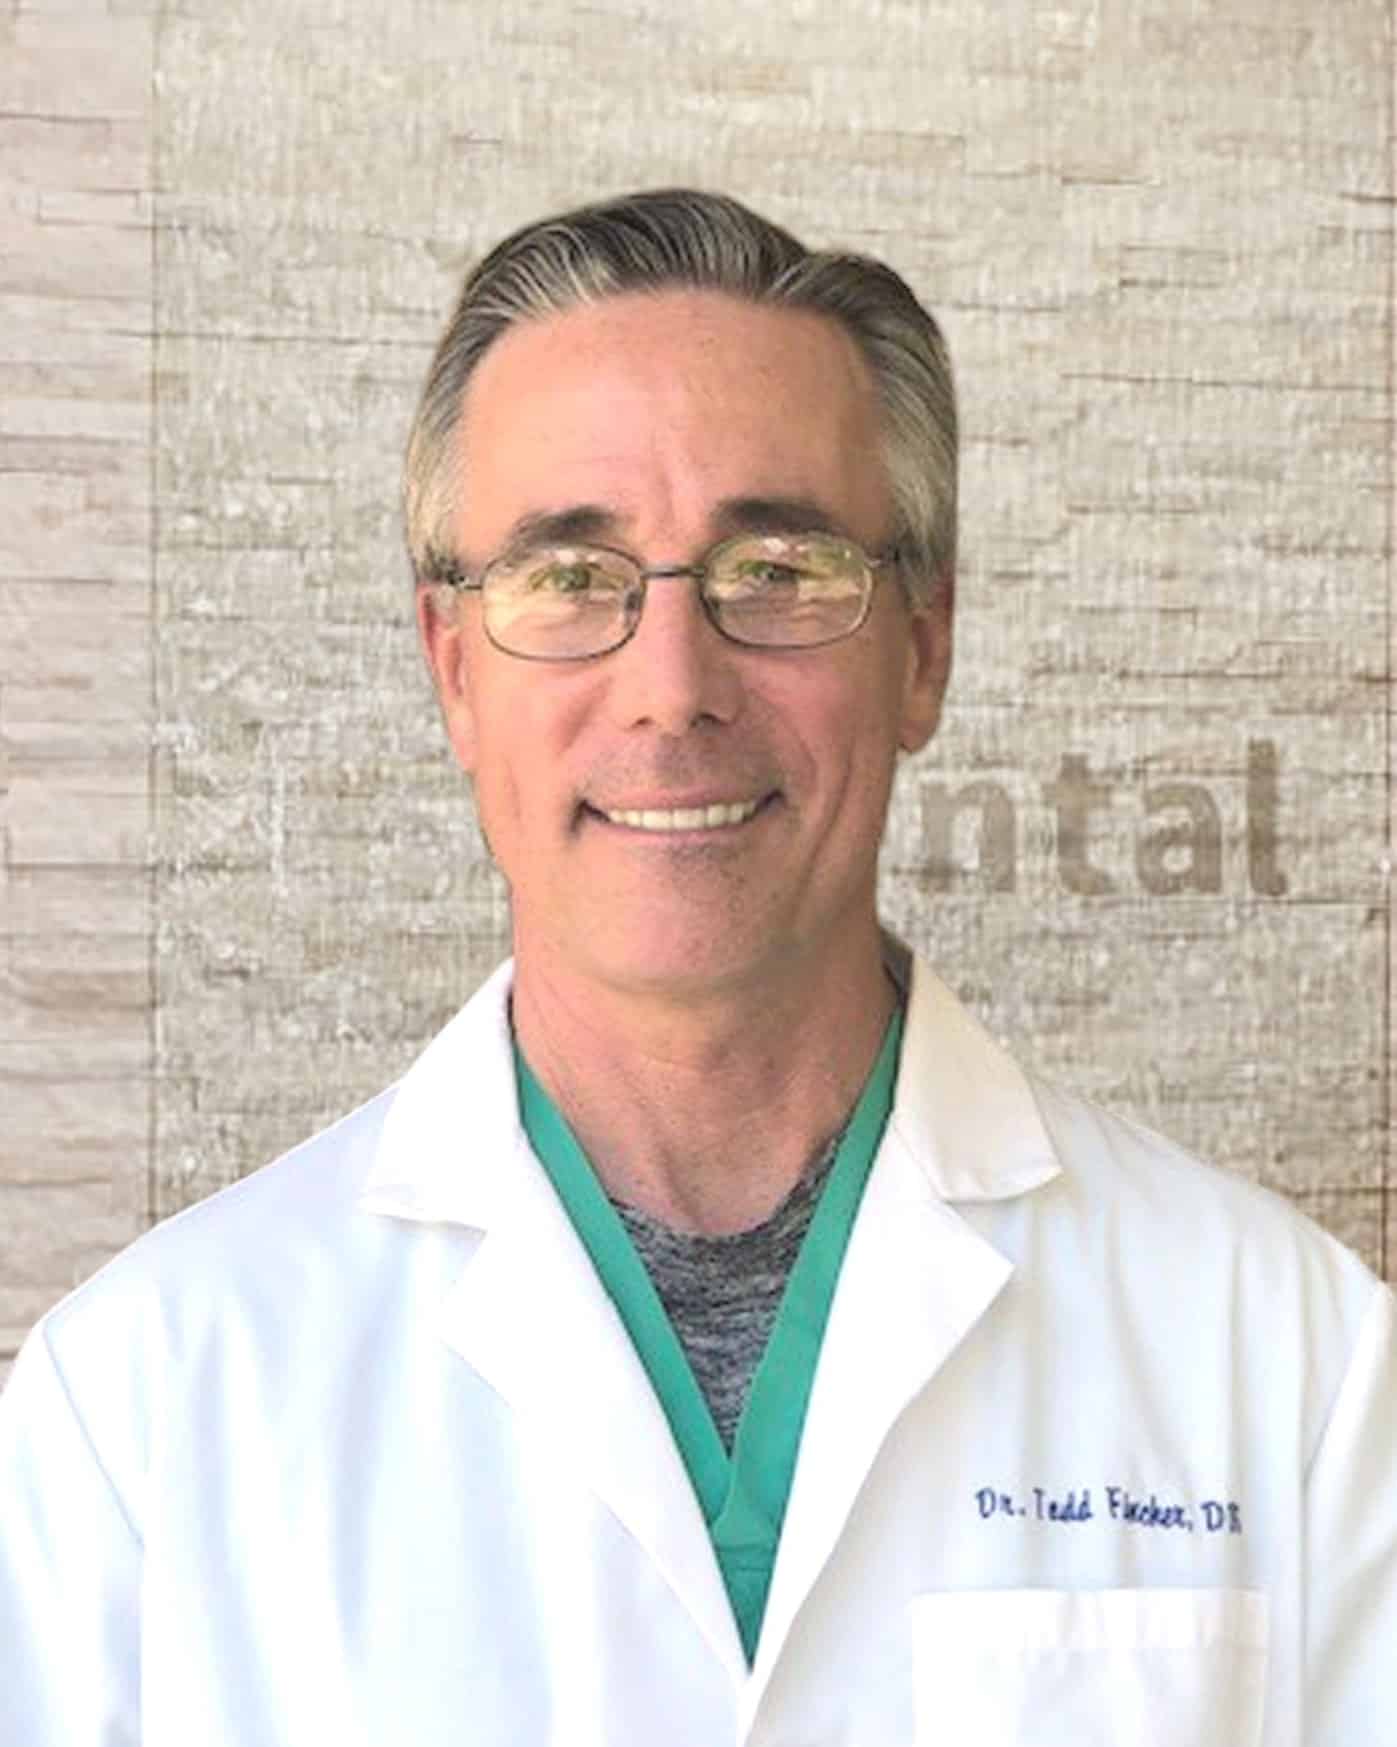 Todd Wallace Fincher, DDS